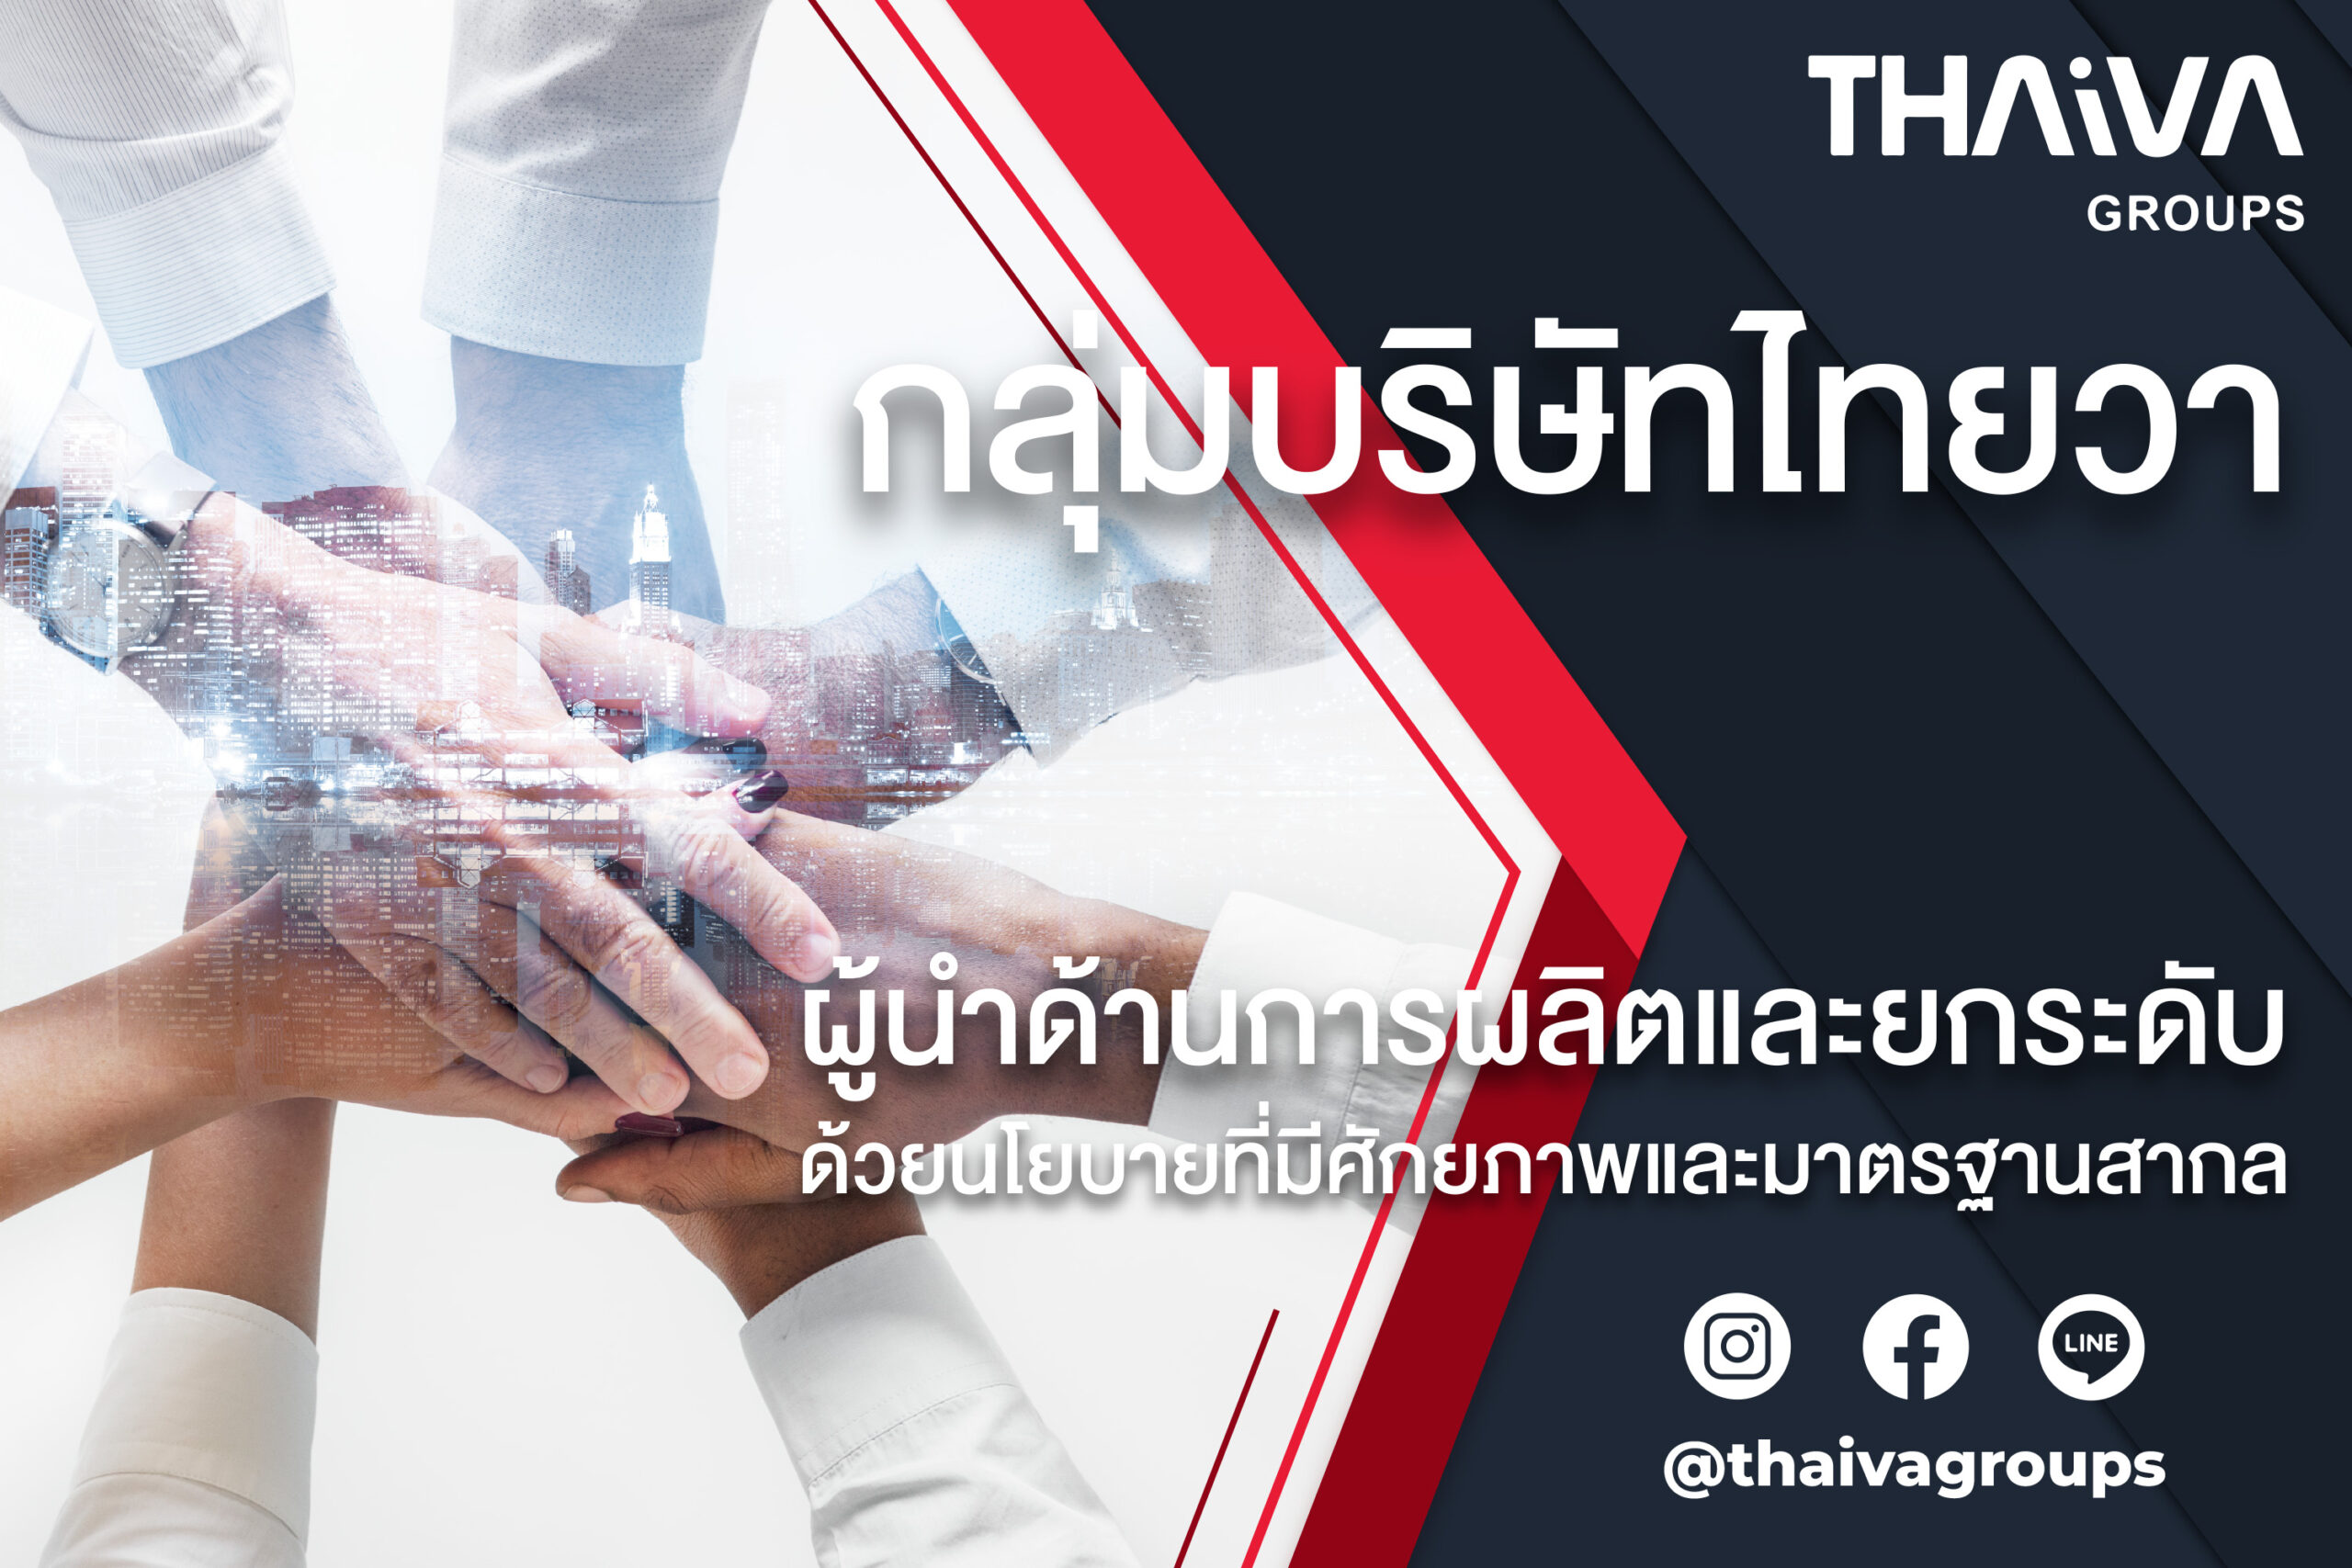 You are currently viewing Thaiva Groups, A leader in manufacturing a product that leverage quality of life and health with potentially reaches an international standard,